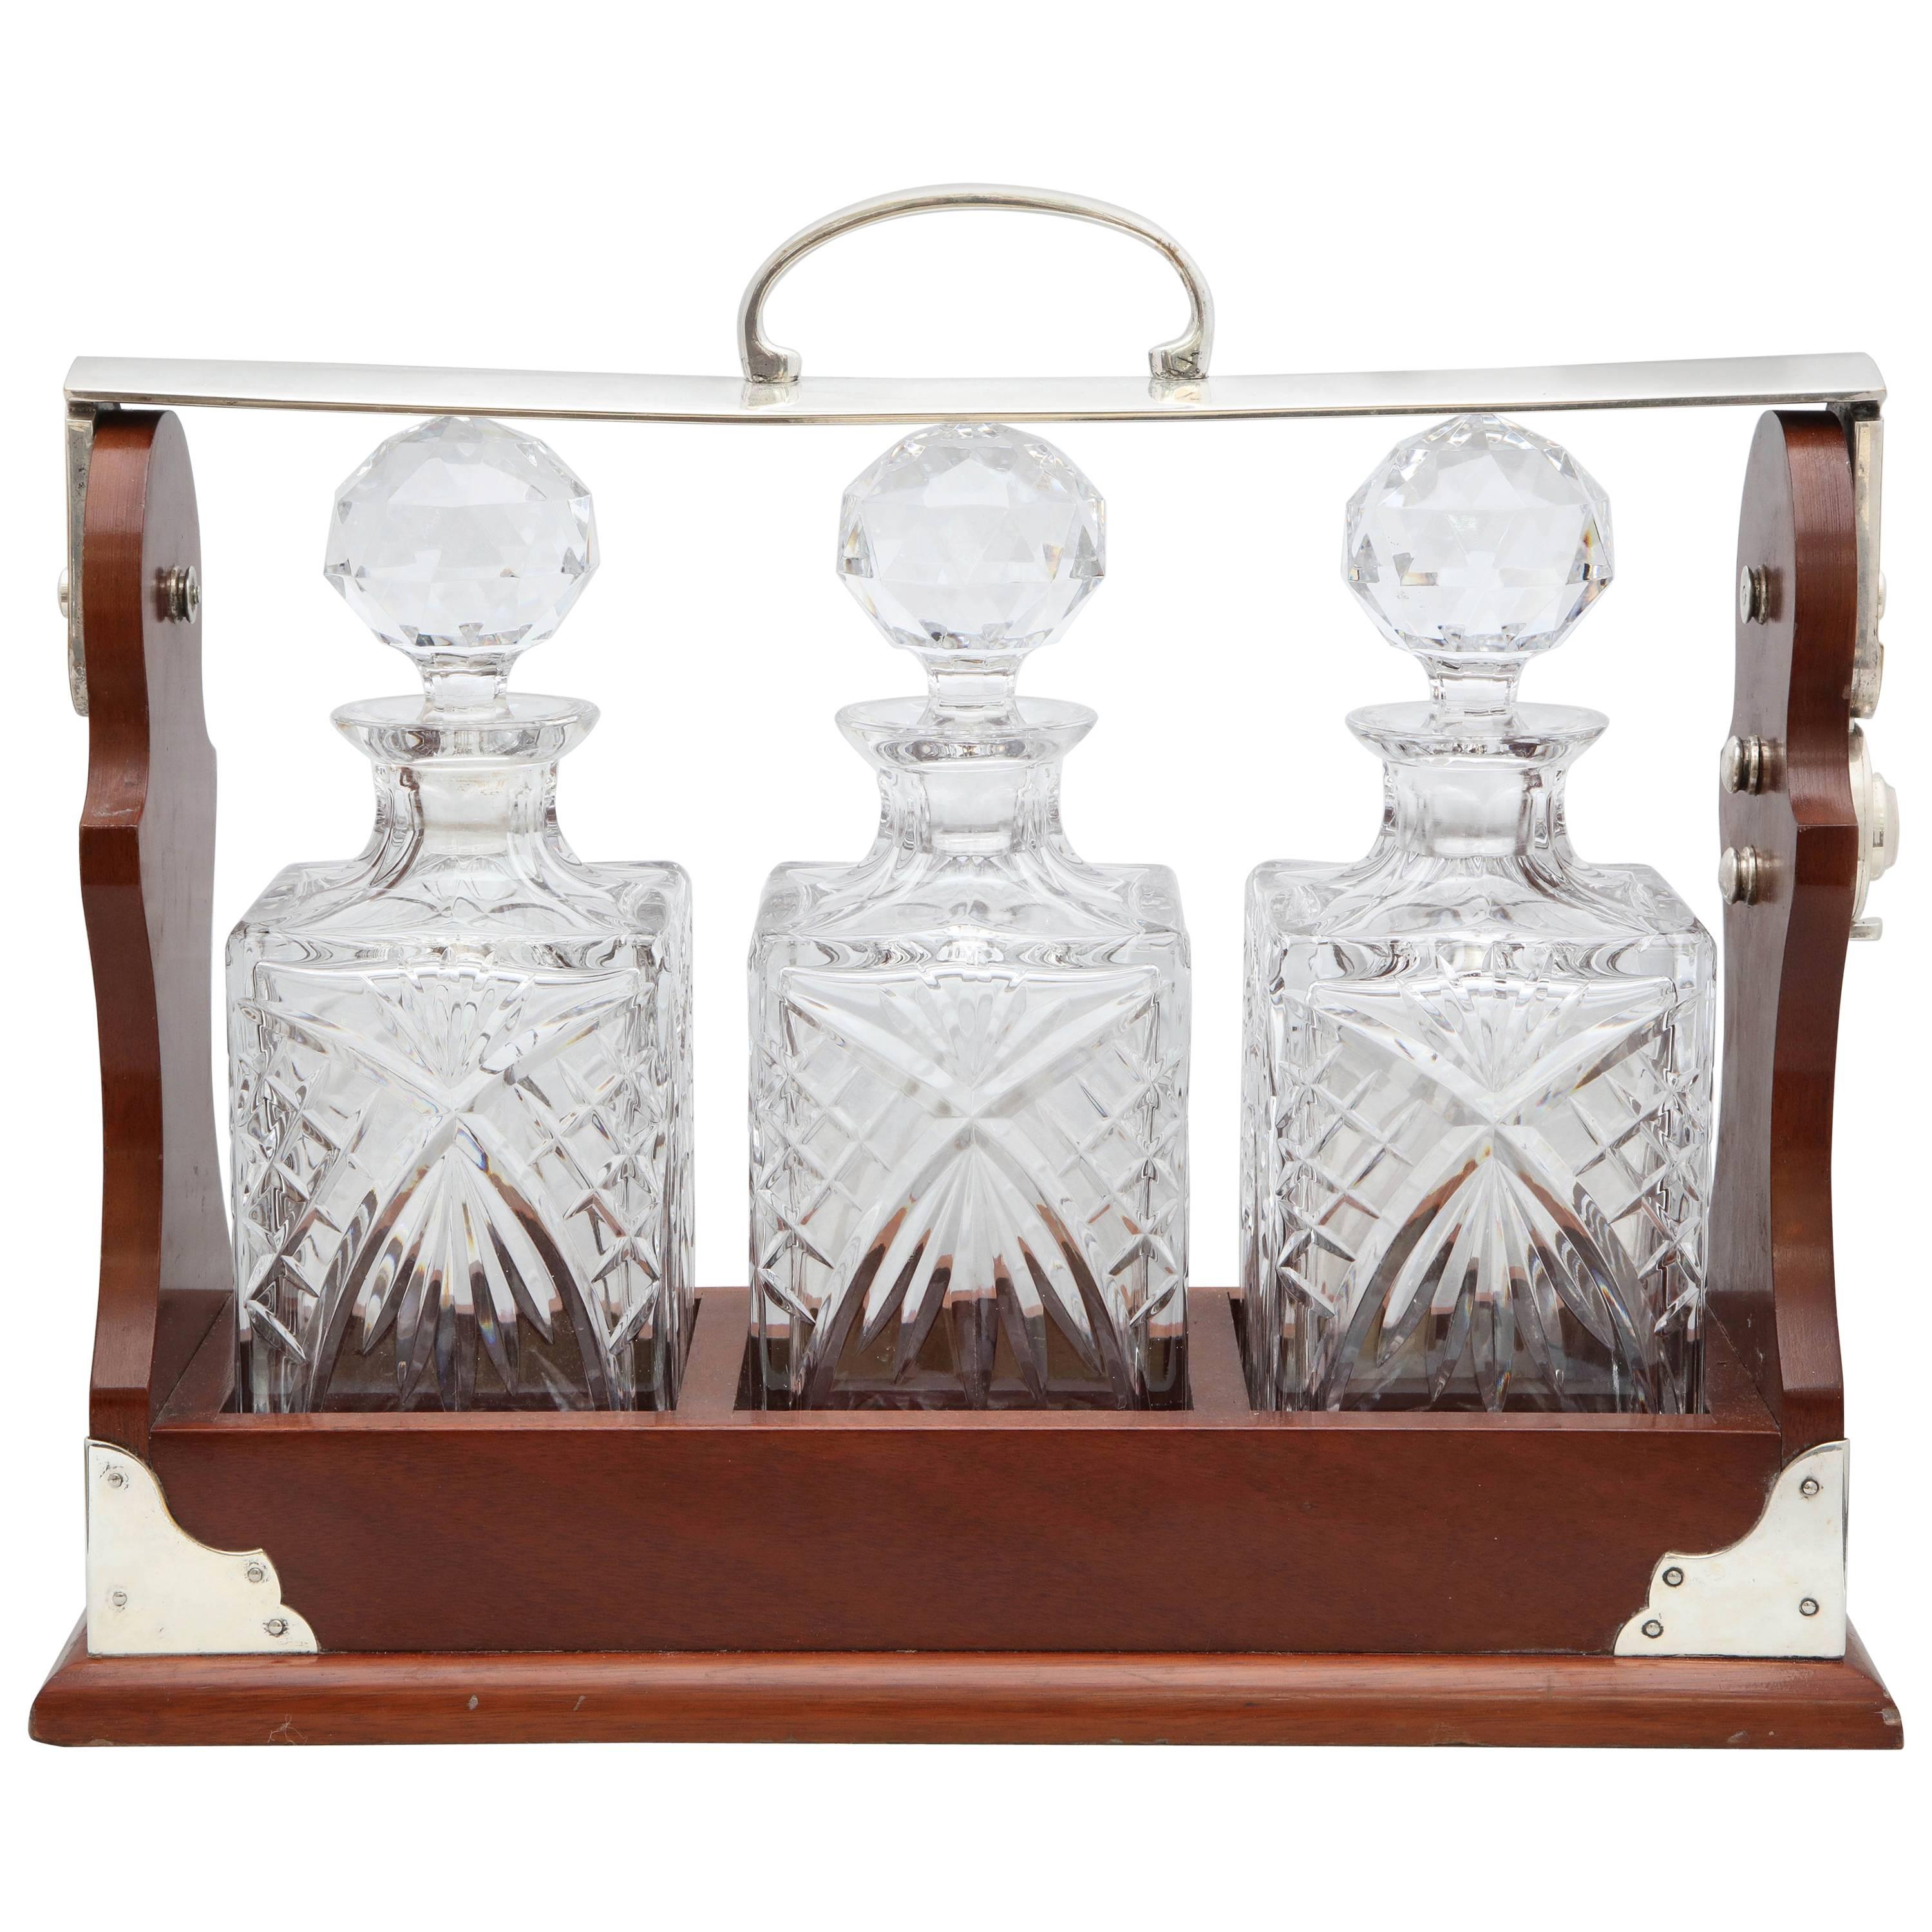 Edwardian Silver Plate, Mounted Wood Case Three Decanter Tantalus